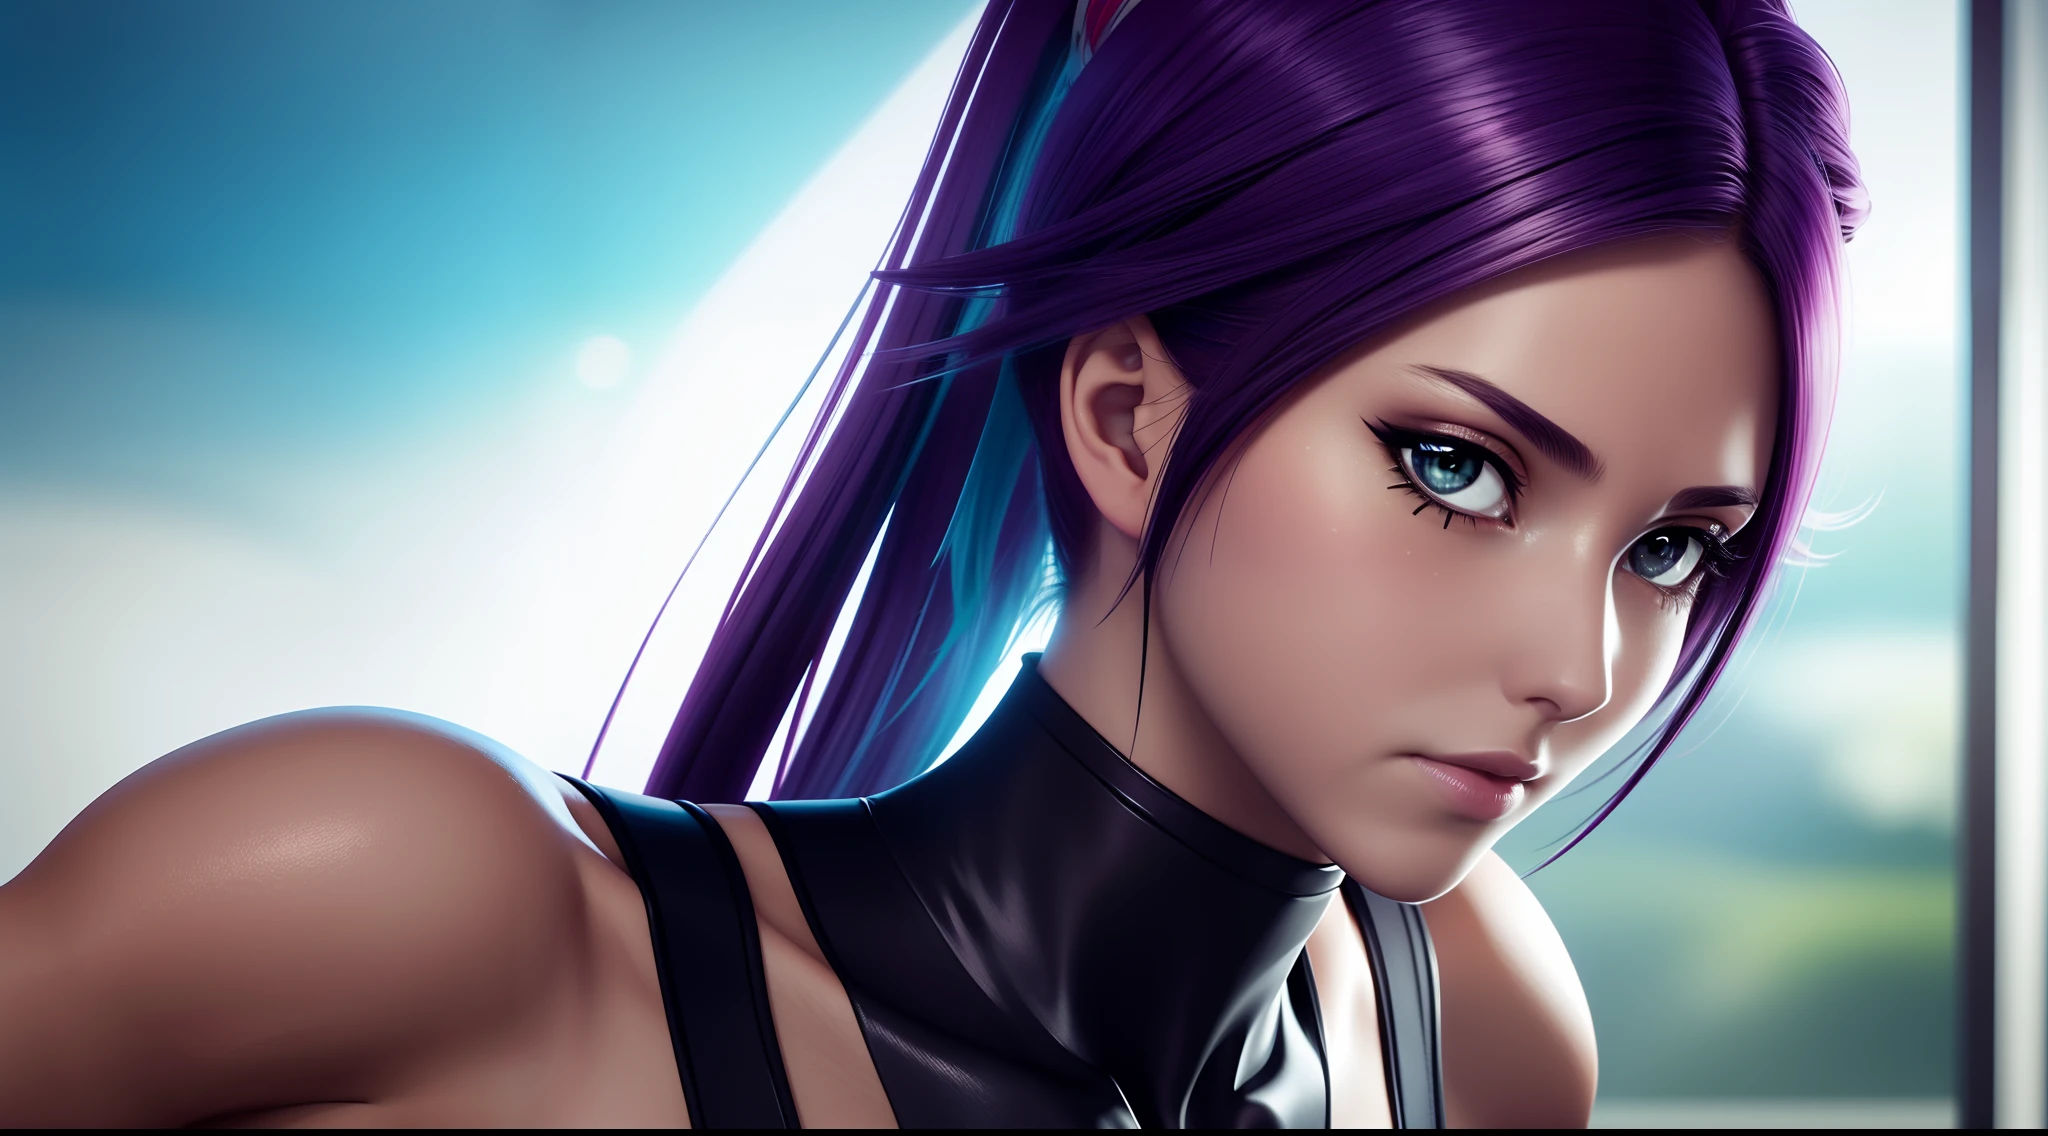 focused upper body, 1 girl, yoruichi shihoin, big breast bust, sparkling eyes, (((training room background))), Colorful beautiful girl: ponytail dark purple hair, nice perfect face with soft skinice perfect face, intricate detail, splash screen, 8k resolution, masterpiece, artstation digital painting smooth, 8k resolution photorealistic masterpiece, professional photography, natural lighting, volumetric lighting maximalist photoillustration: by marton bobzert